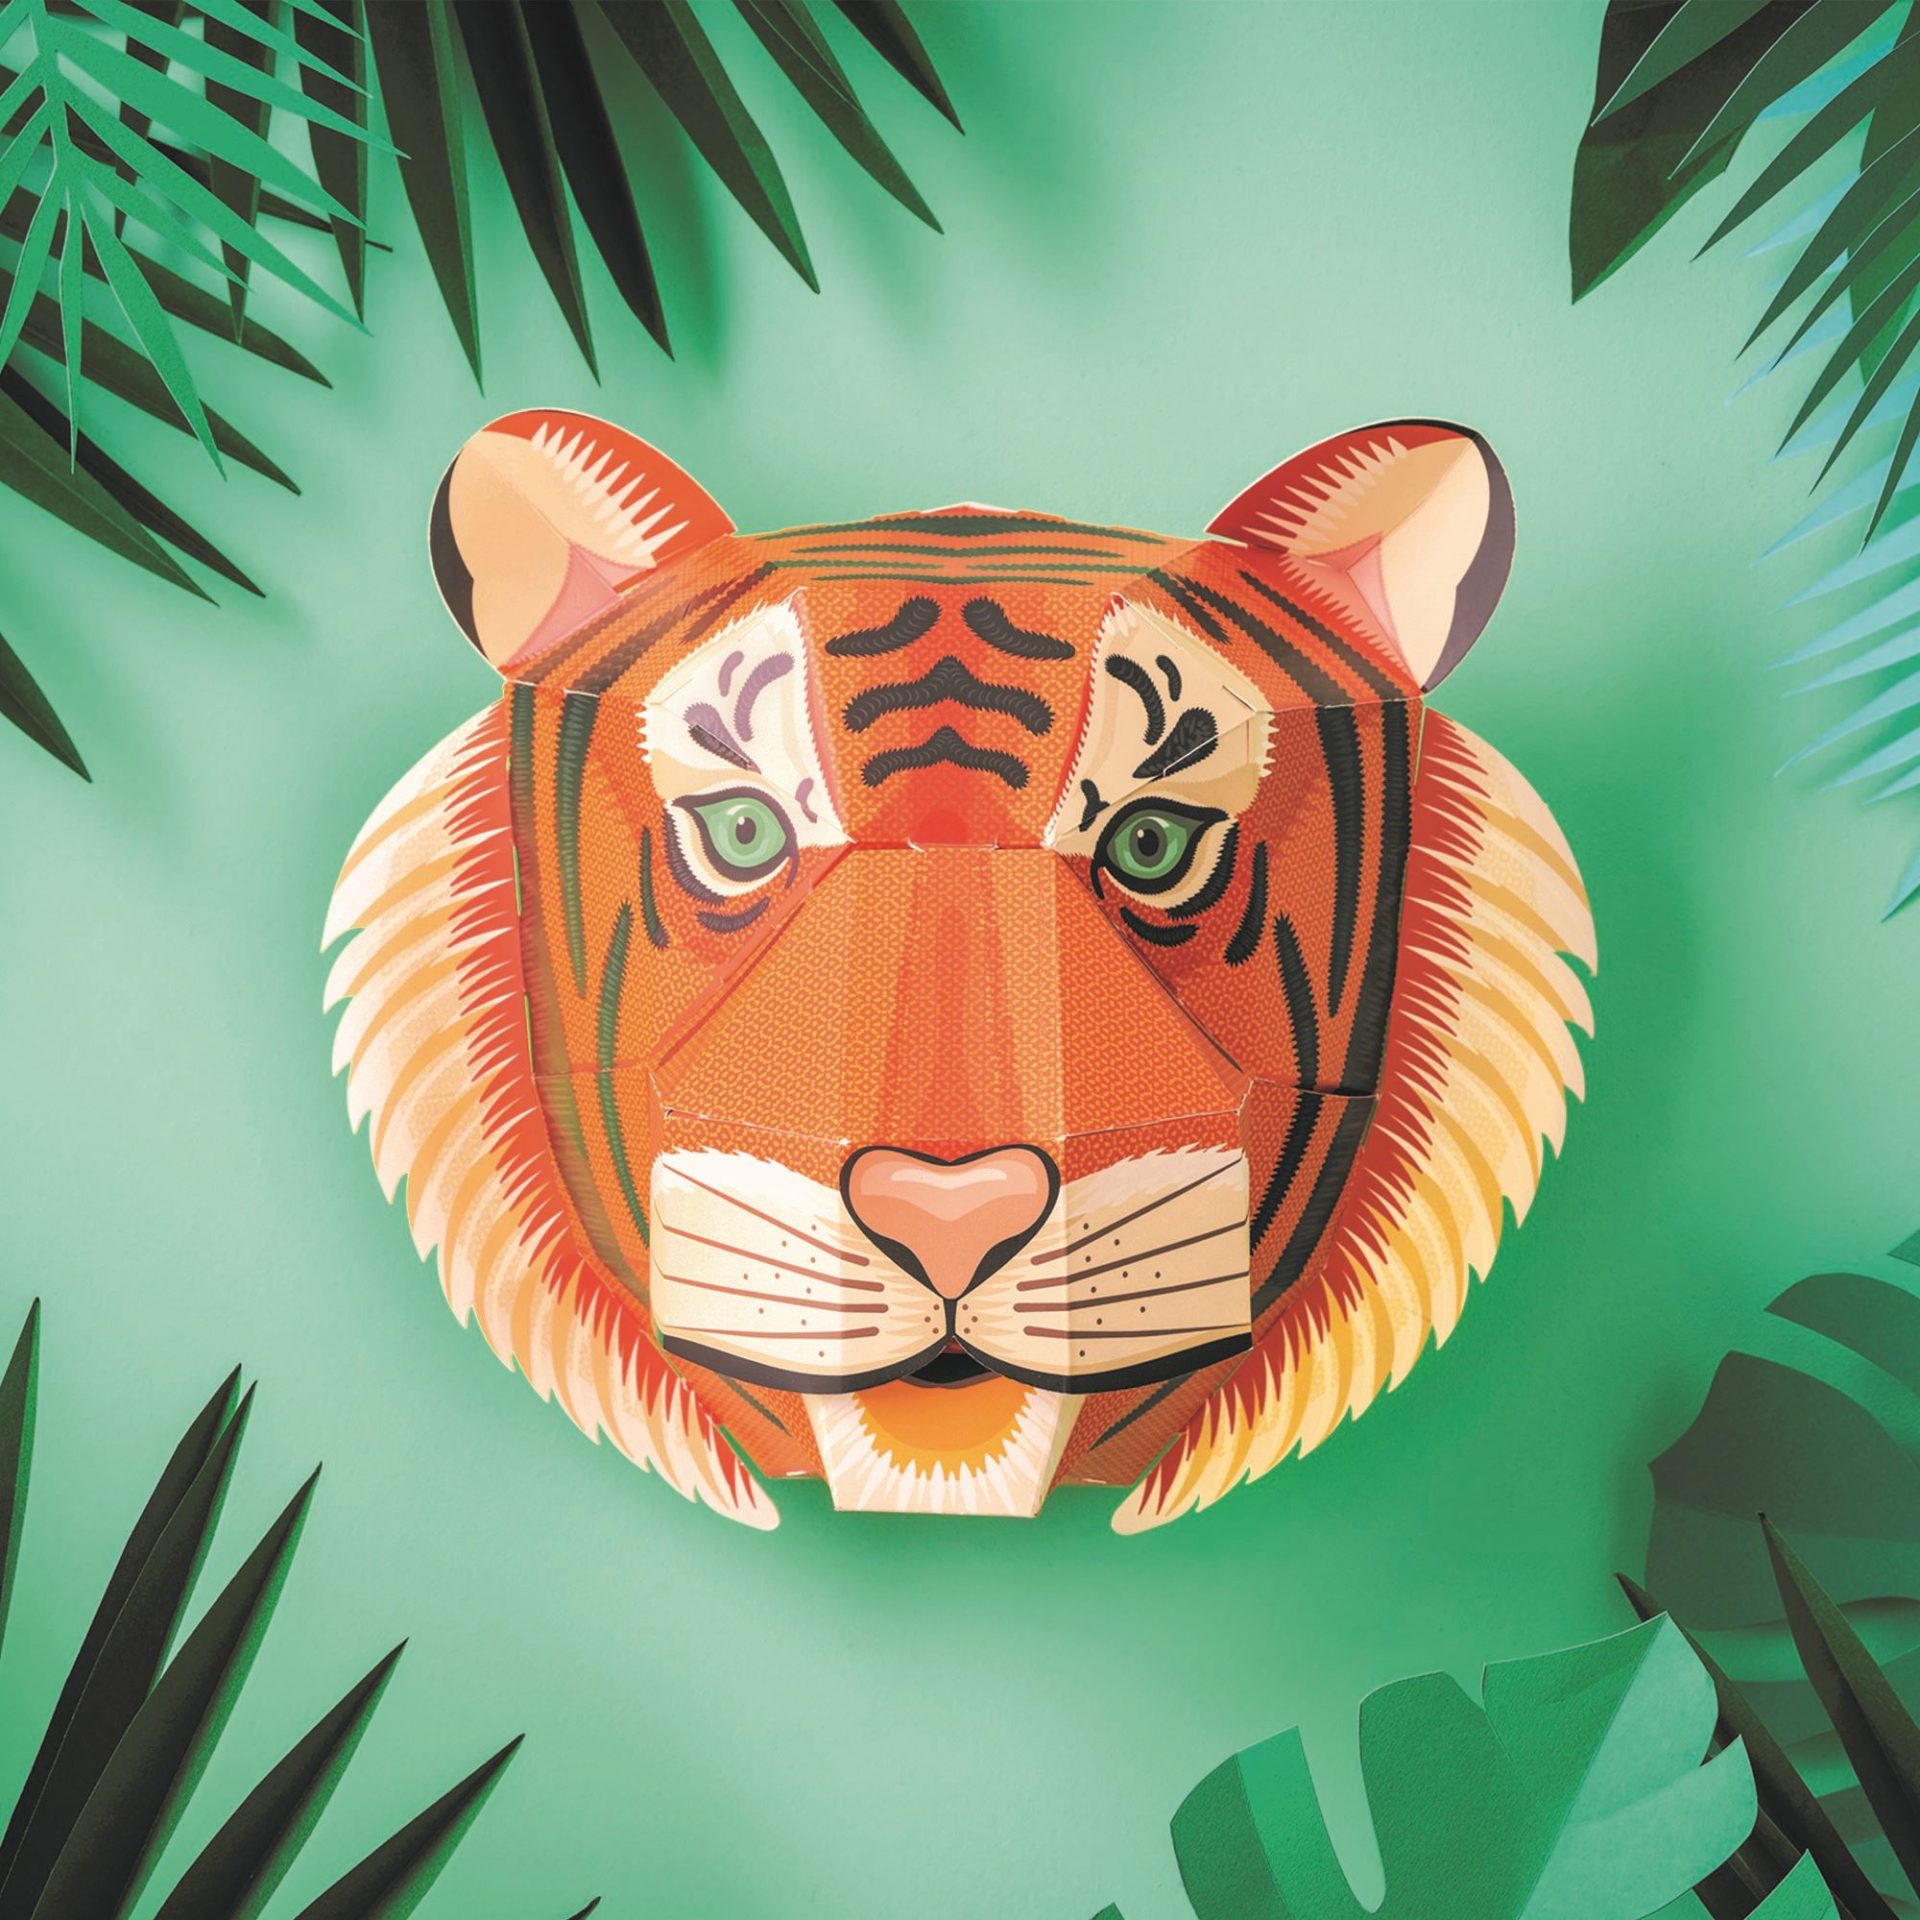 Tiger Head - 3D Model Kit - Arts and Crafts for Kids